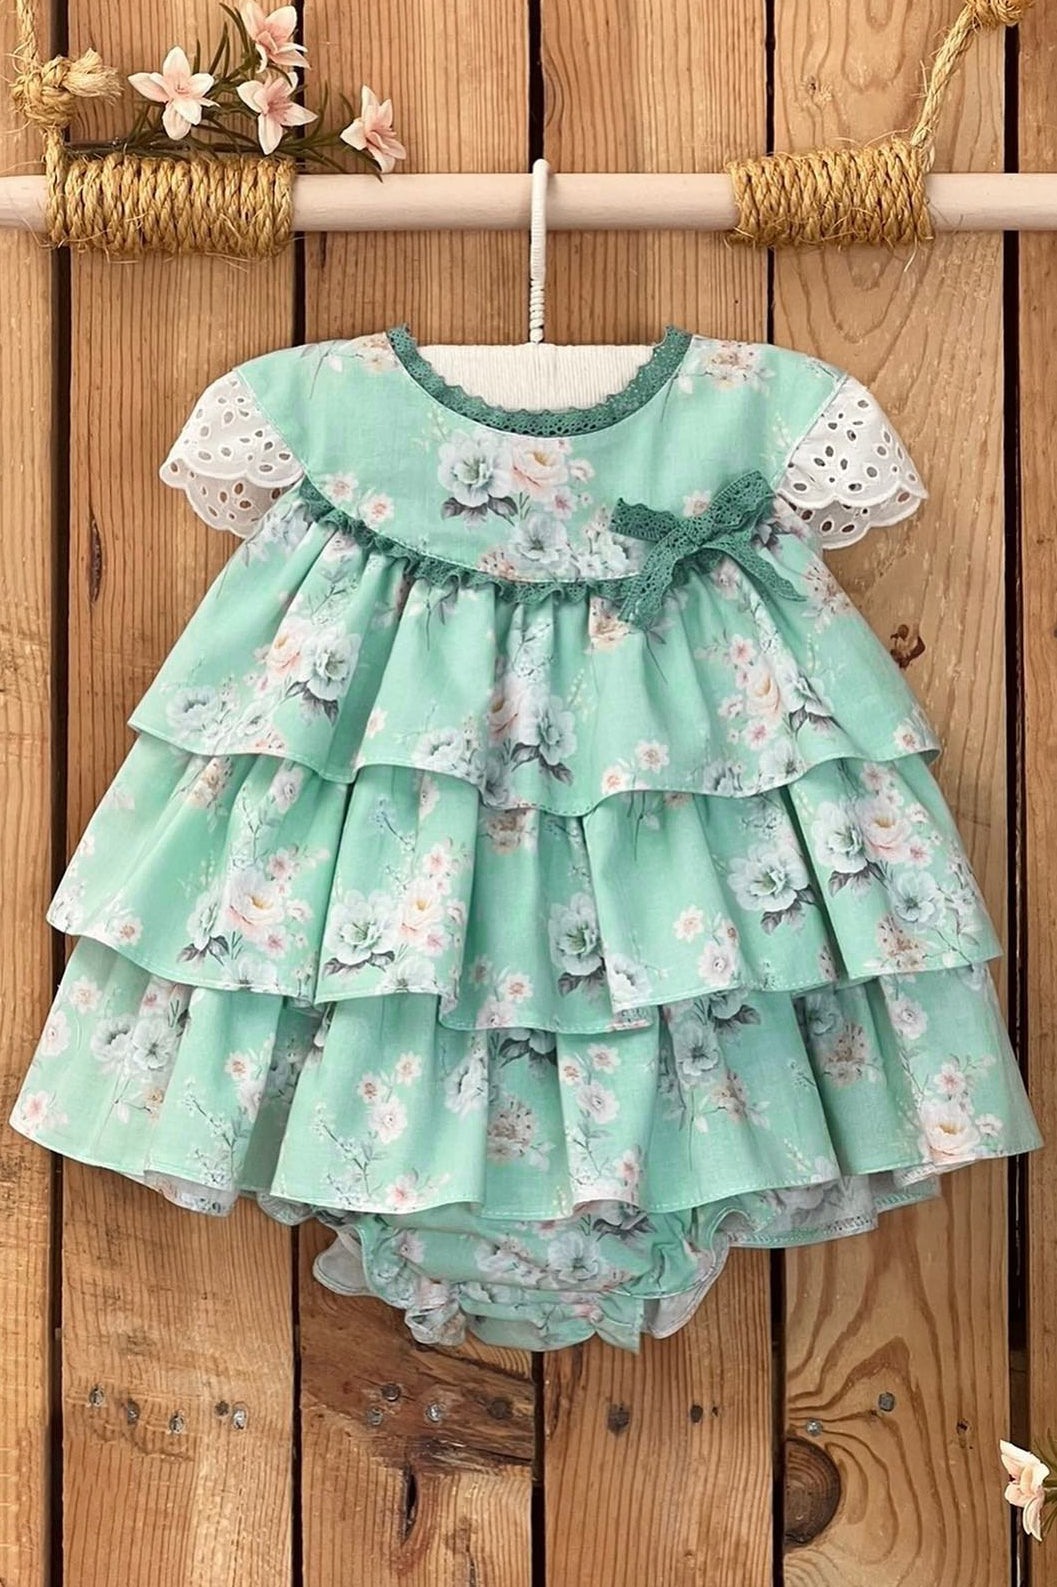 Valentina Bebes "Cordelia" Mint Floral Layered Dress & Bloomers | iphoneandroidapplications